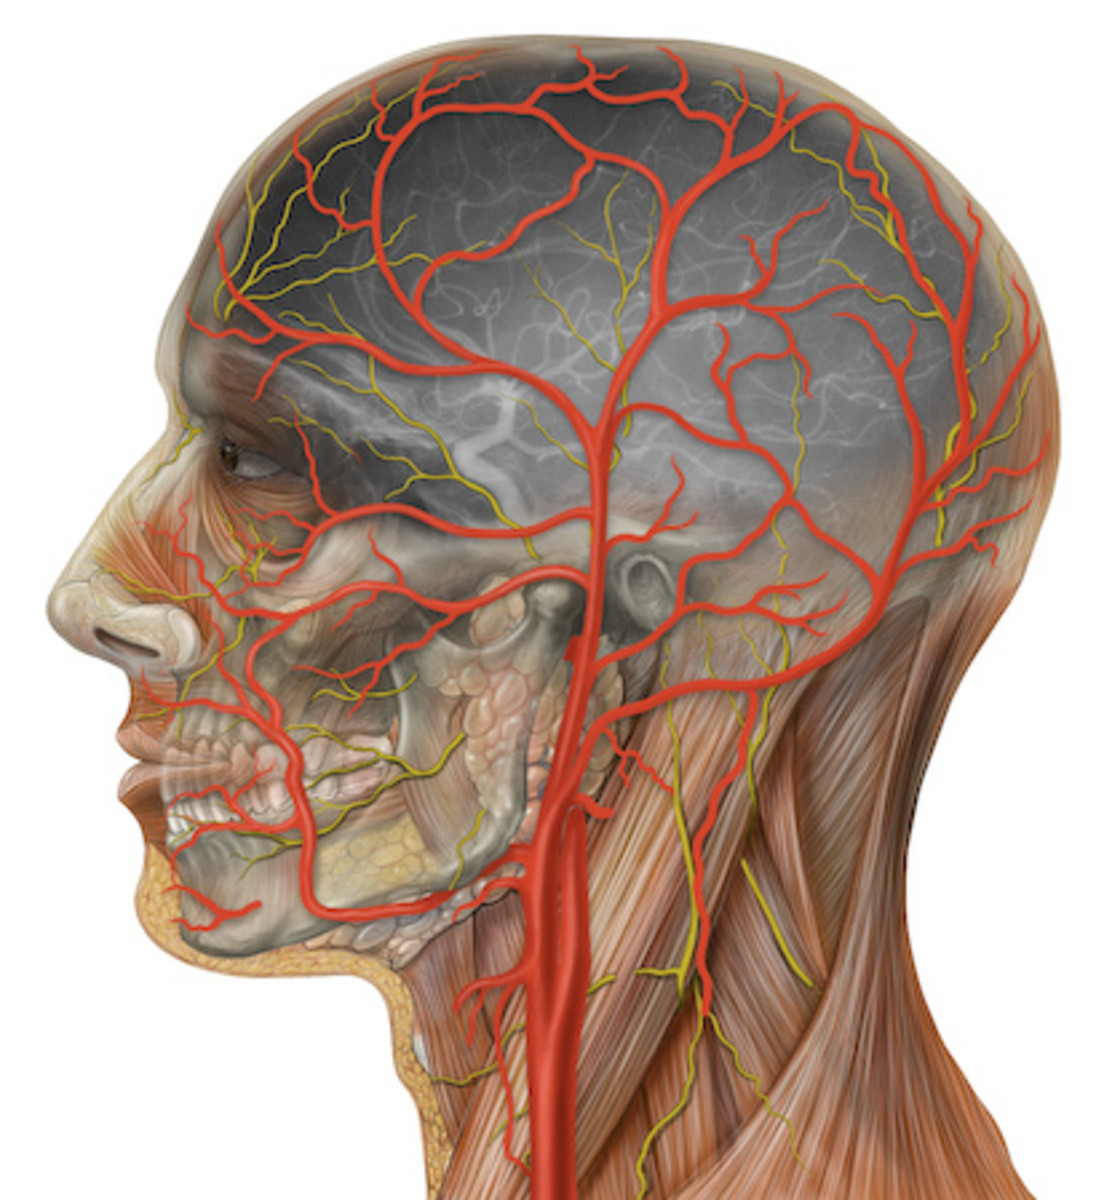 Temporal arteritis is an inflammation in the blood vessels, specifically those that supply your head with blood. 